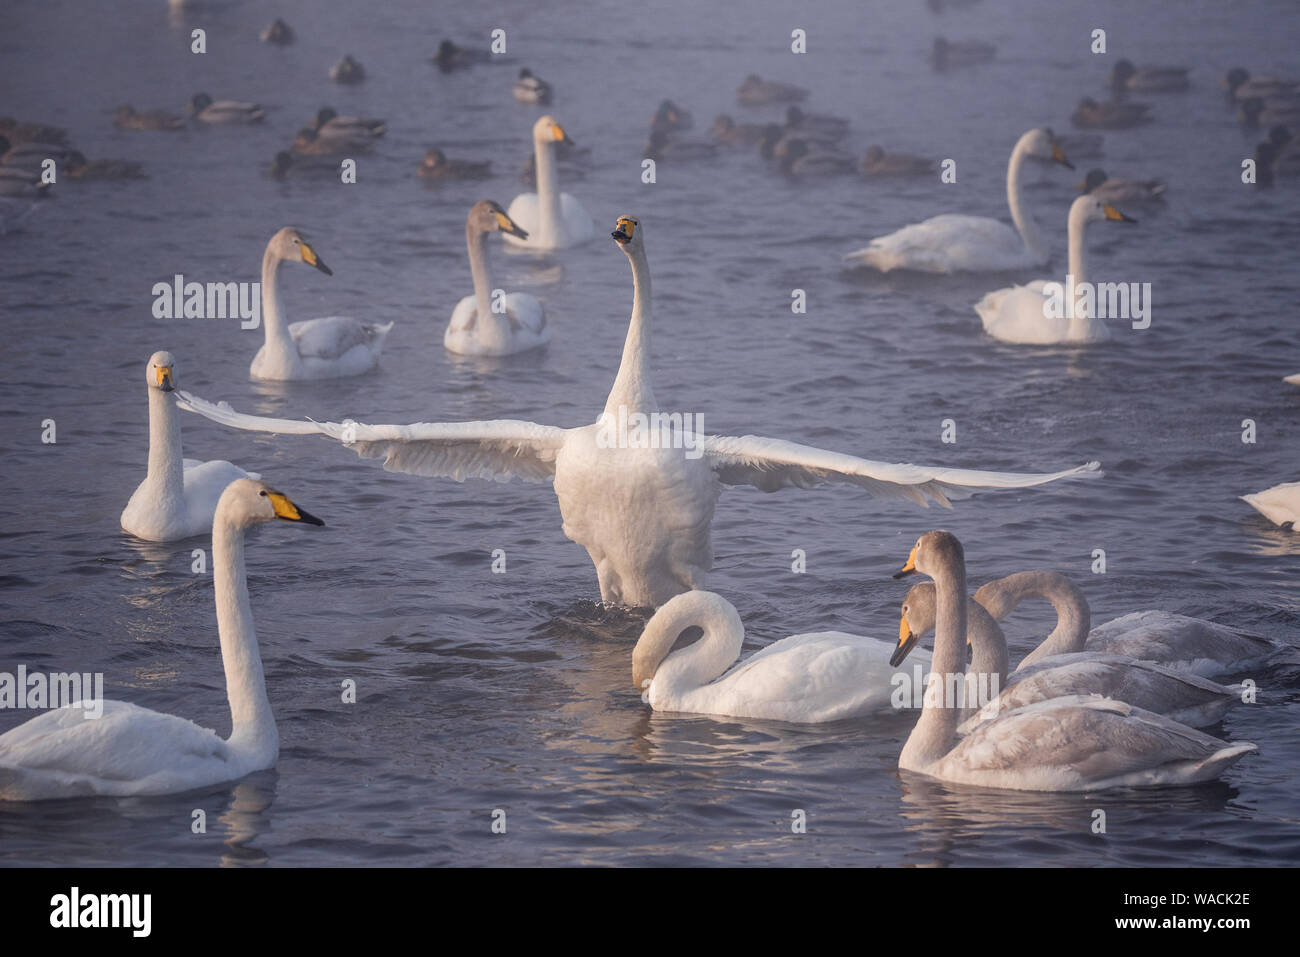 The swan flaps its wings. Dries wings and shows its dominance. 'Lebedinyj' Swan Nature Reserve, 'Svetloye' lake, Urozhaynoye Village, Sovetsky Distric Stock Photo